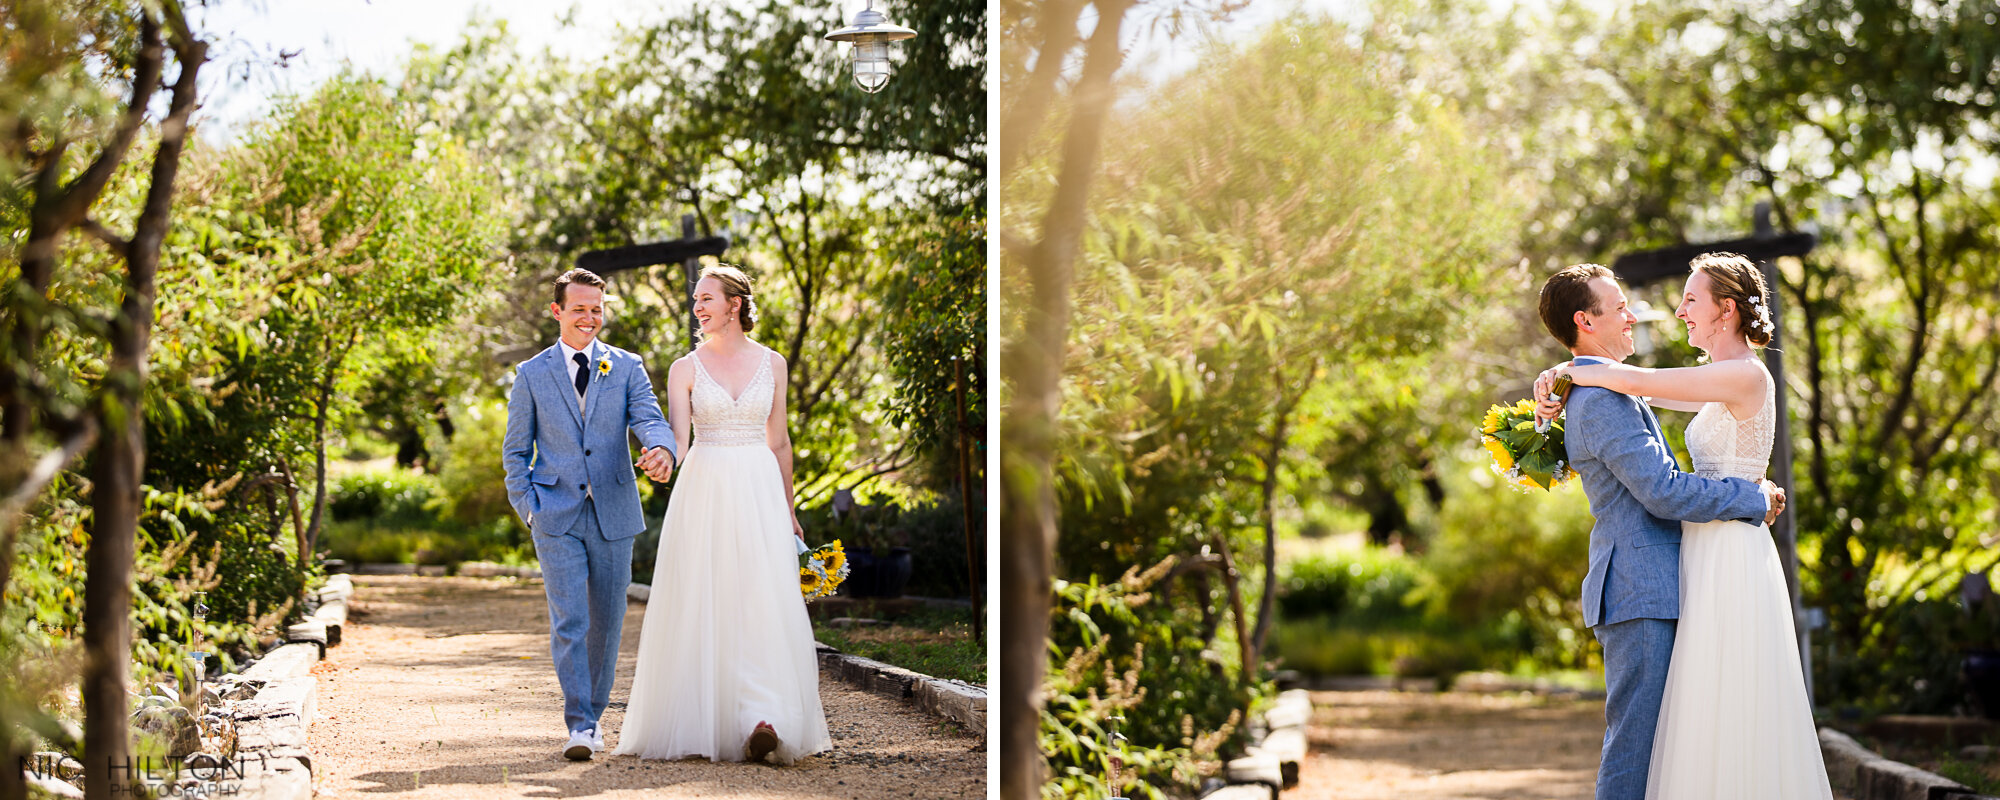 First-Look-Taber-Ranch-Wedding-Photography.jpg